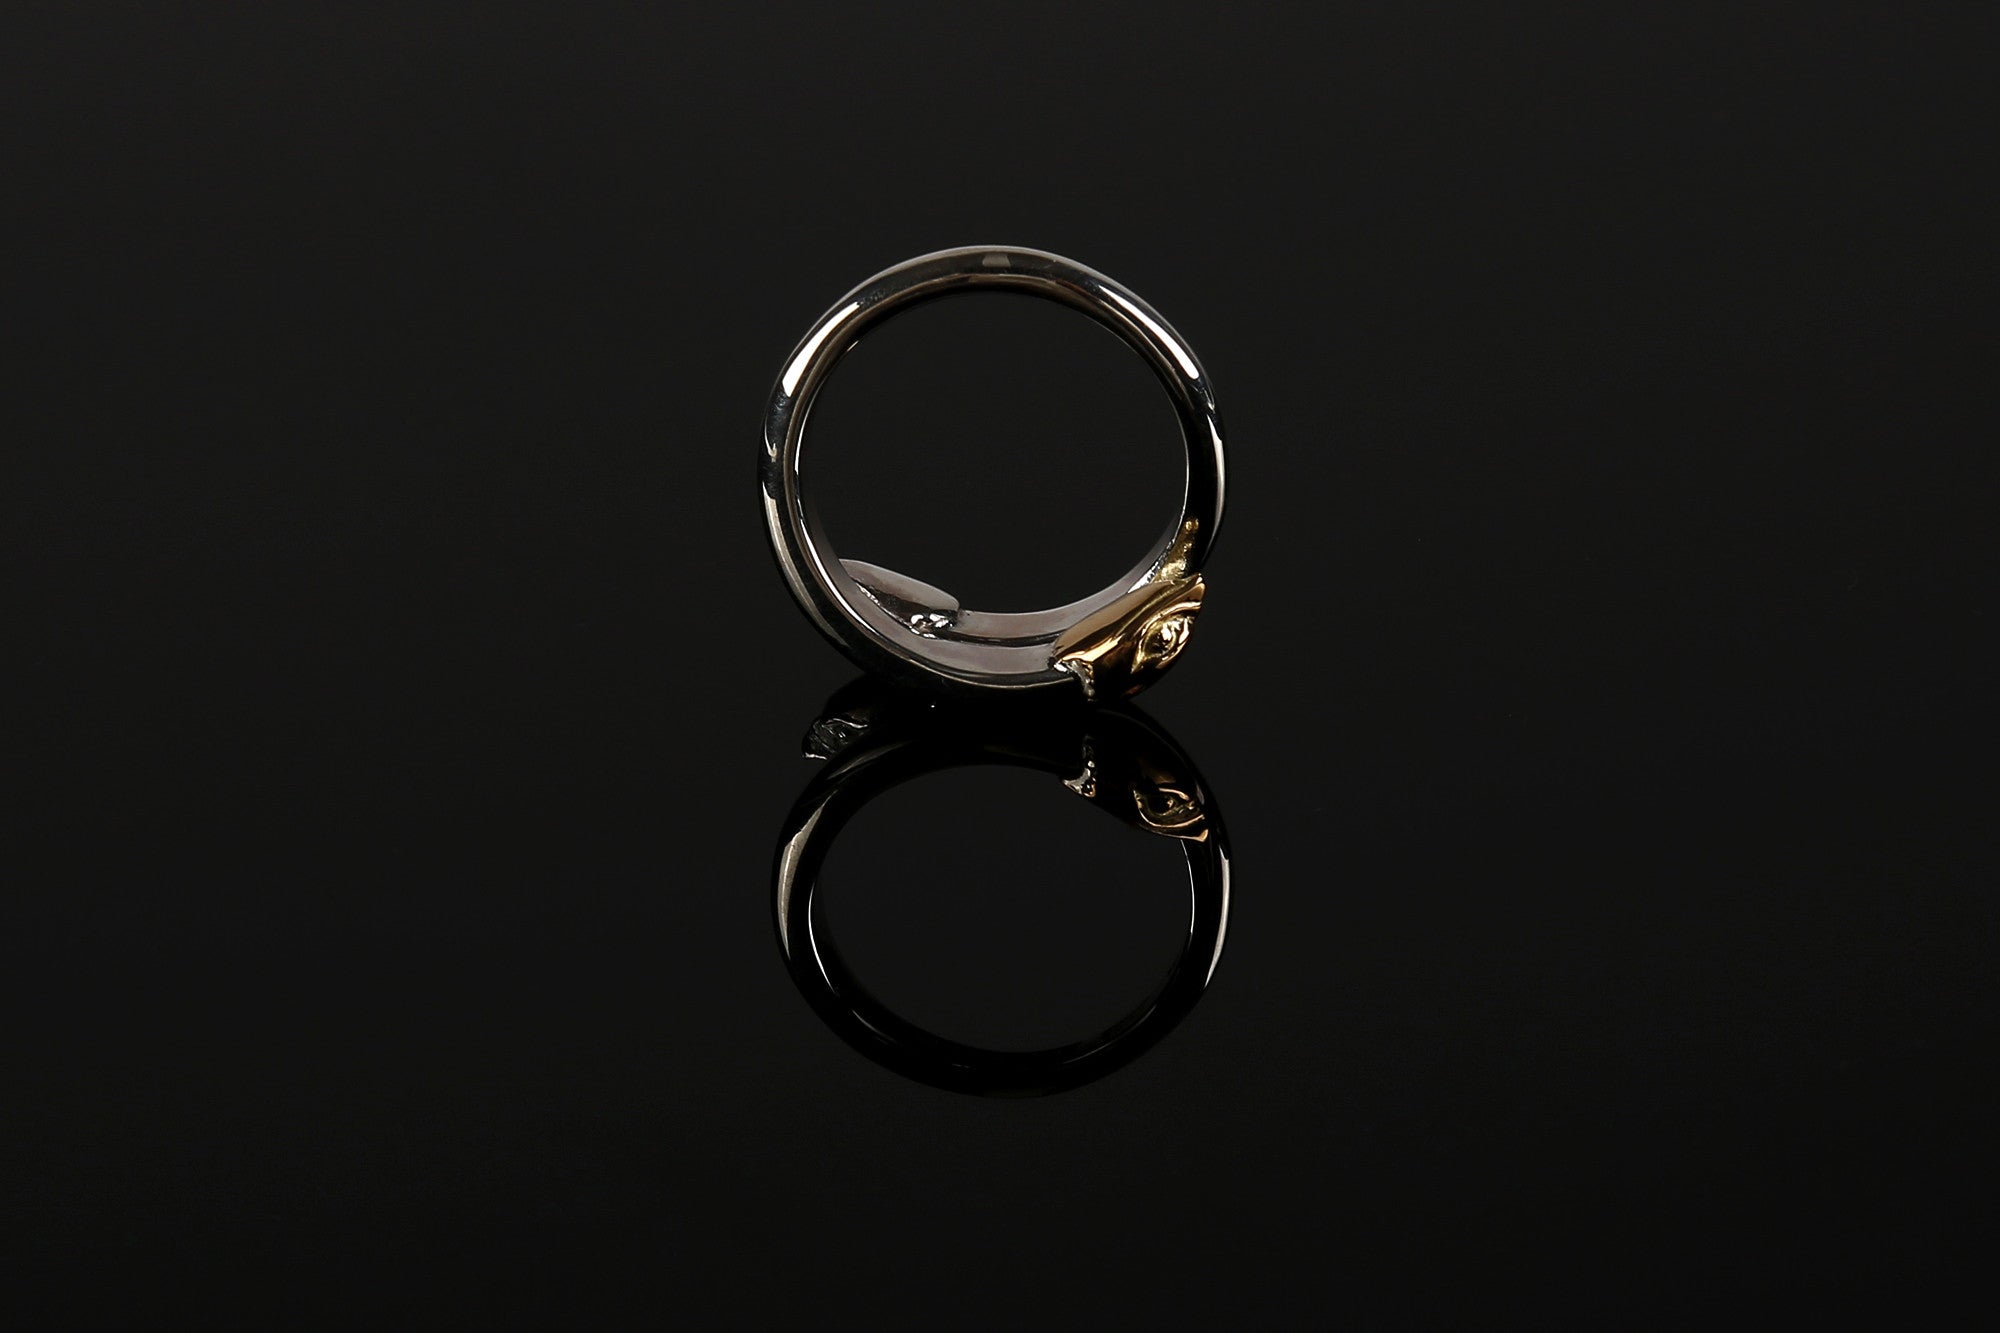 First Arrow's 18k Gold+Silver Double Eagle Ring